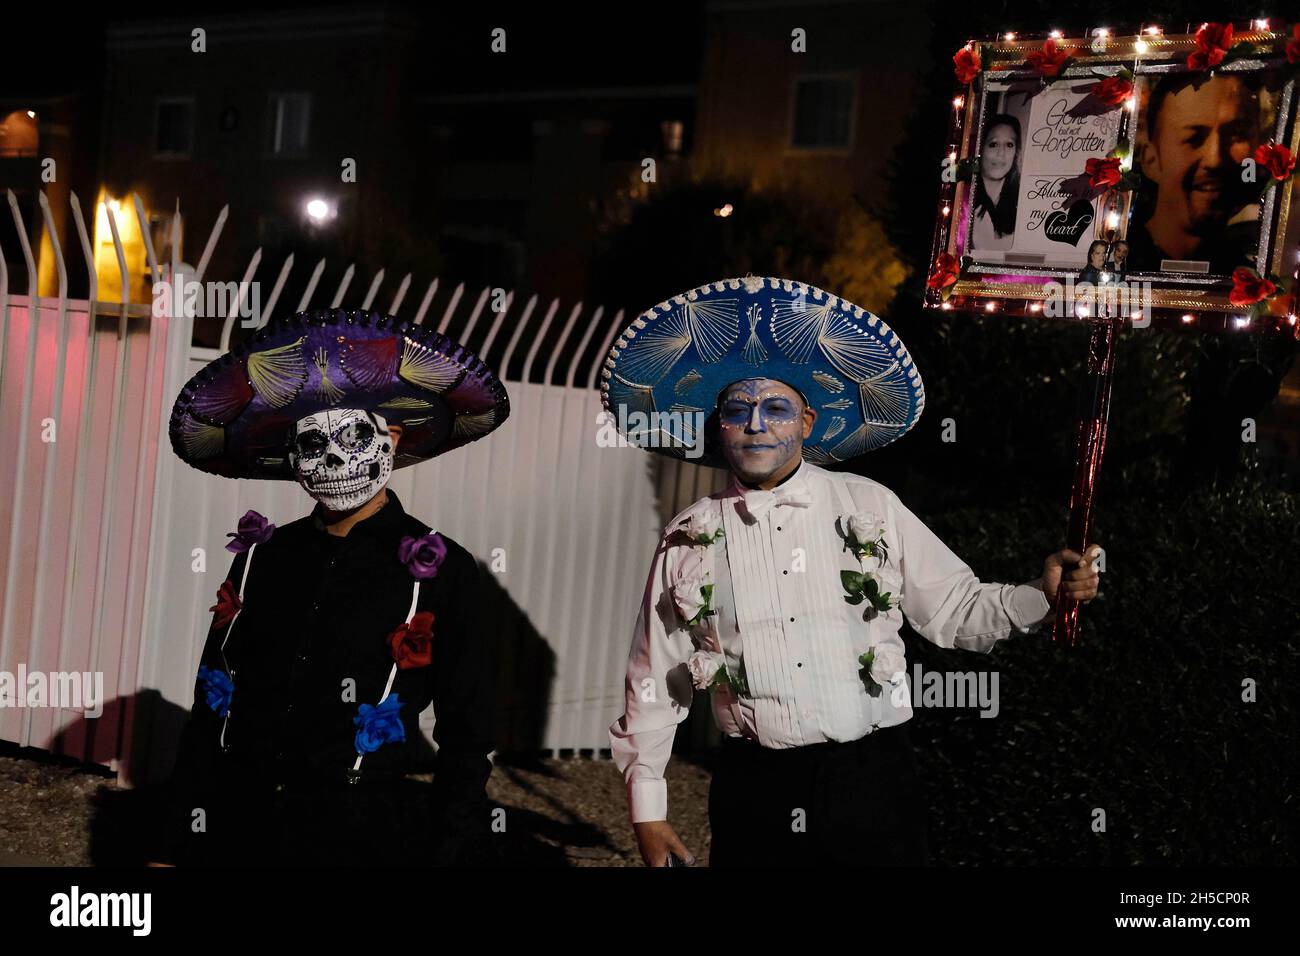 Tucson, Arizona, USA. 7th Nov, 2021. The 32nd annual All Souls Procession in Tucson. Put on by the organization Many Mouths One stomach it is a chance for the public to come together and remember relatives, friends and loved ones who have passed on . Tens of thousands turn out with pictures of the deceased, dressed in ornate costumes and carrying shrines . It looks similar to Mexico's Day of the Dead but is not part of that celebration. People leave messages for their loved ones that are collected by costumed ushers who place the notes in a giant urn that is carried through the streets Stock Photo